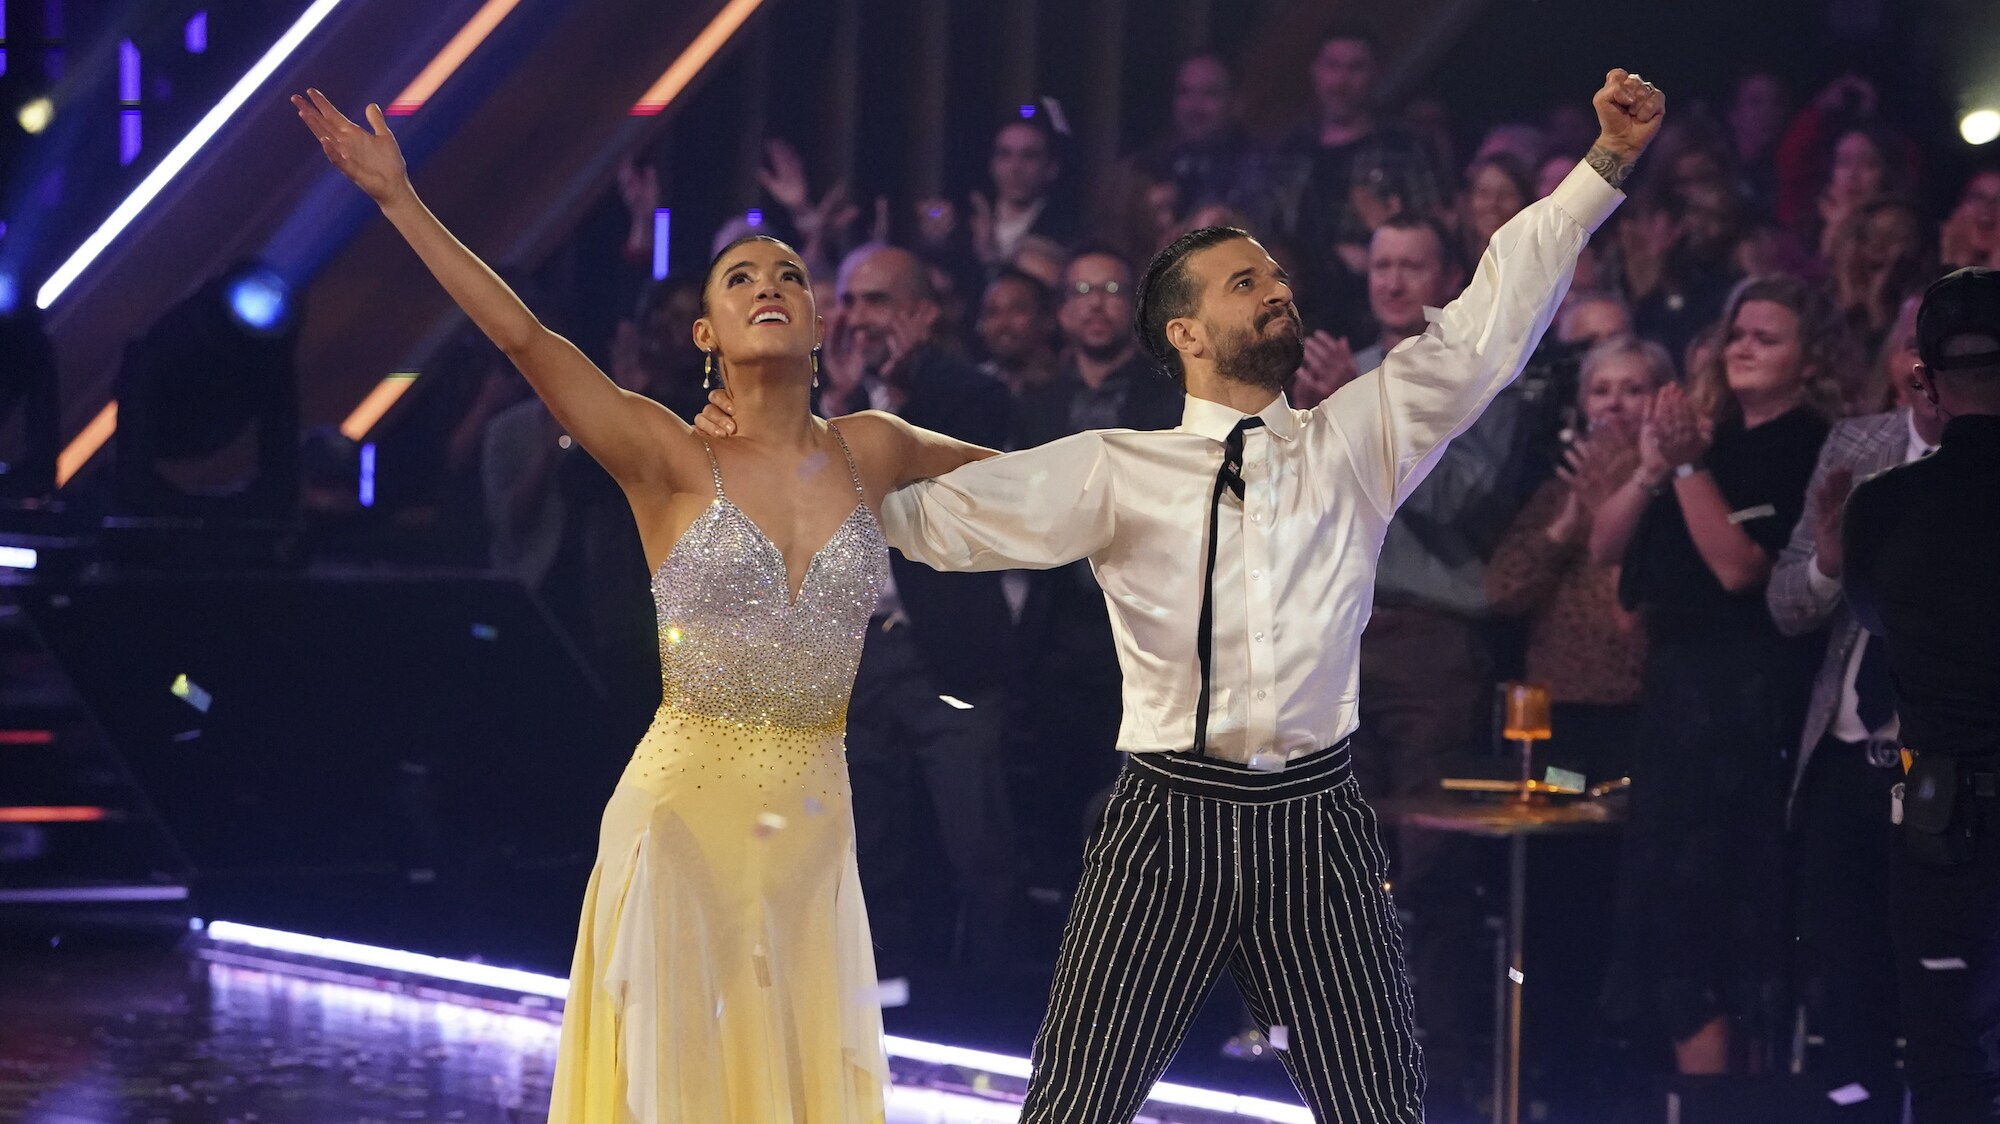 DANCING WITH THE STARS - “Finale” – The four finalists perform their final two routines in hopes of winning the mirrorball trophy. Each couple will perform a redemption dance and an unforgettable freestyle routine. A new episode of “Dancing with the Stars” will stream live MONDAY, NOV. 21 (8:00pm ET / 5:00pm PT), on Disney+. (ABC/Eric McCandless) CHARLI D’AMELIO, MARK BALLAS